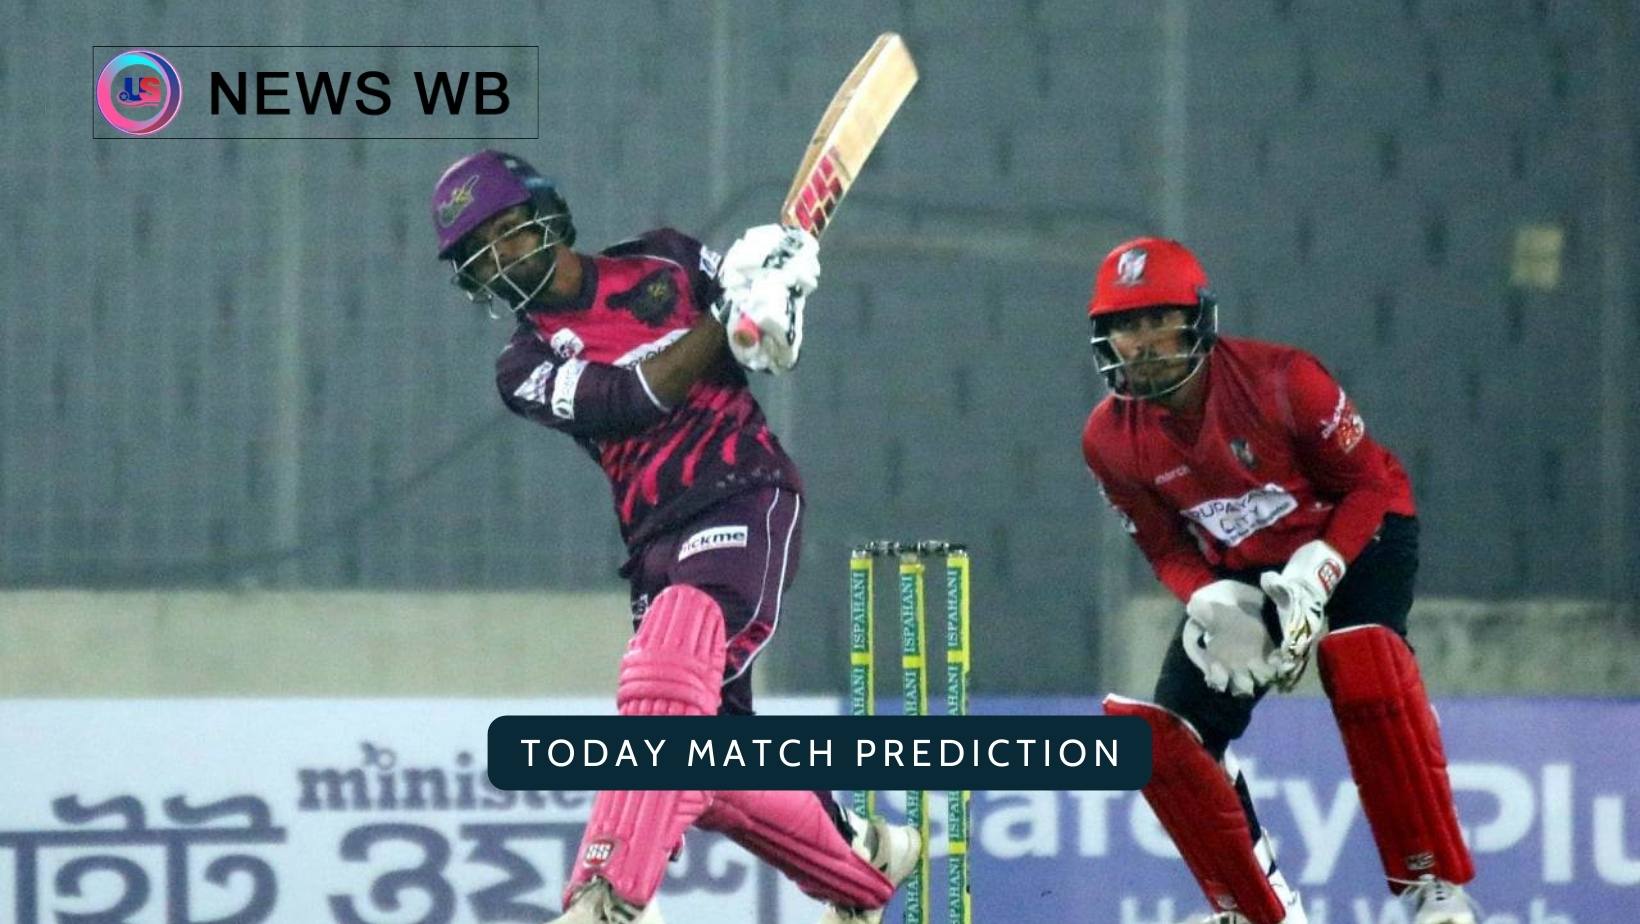 Today Match Prediction: SST vs CGC Dream11 Team, Sylhet Strikers vs Chattogram Challengers 13th Match, Who Will Win?